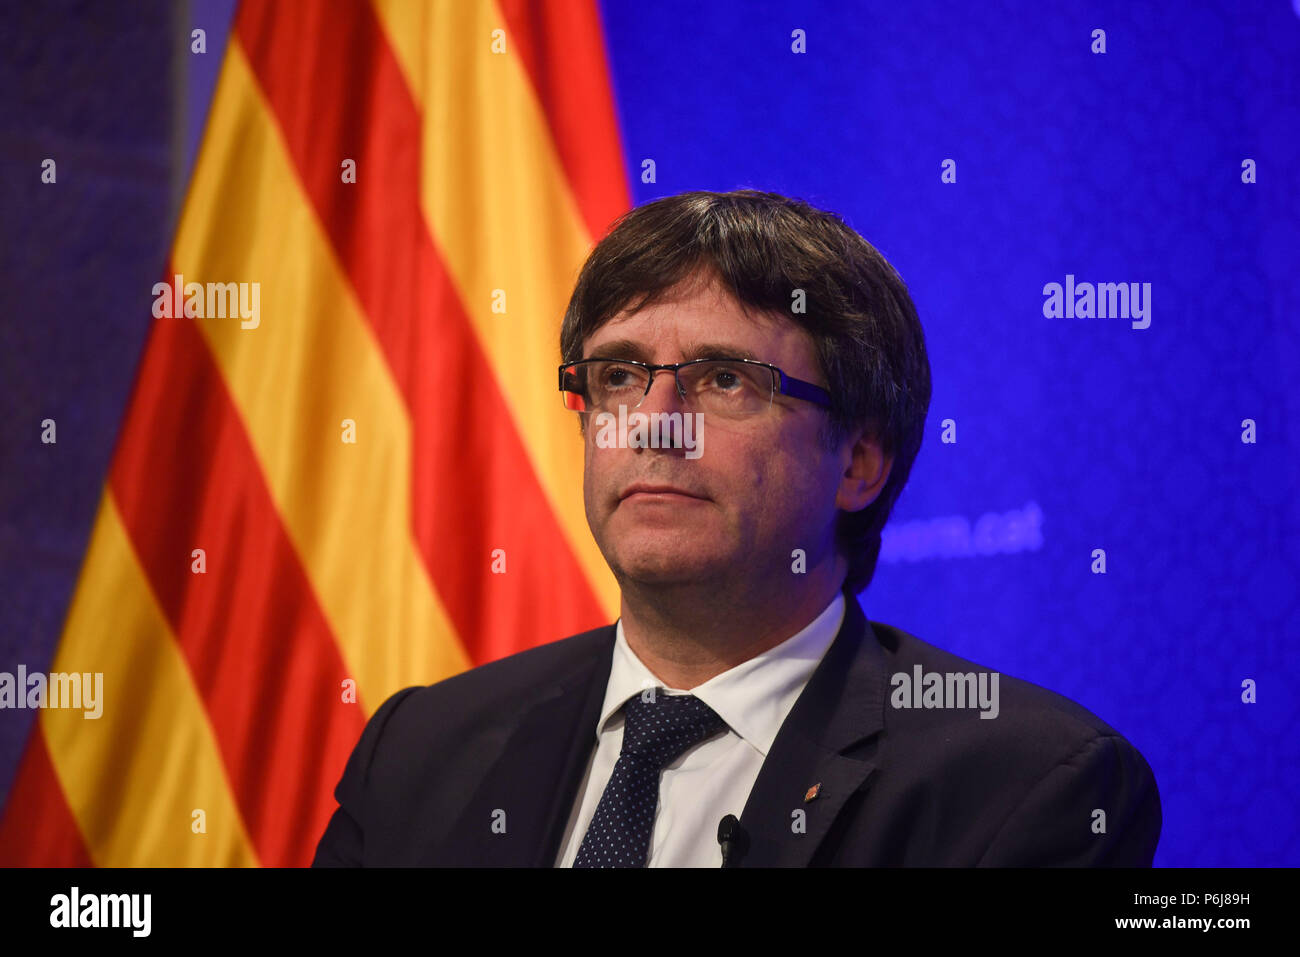 September 11, 2017 - Barcelona, Spain: Catalan president Carles Puigdemont attends a press conference on the morning before hundreds of thousands of Catalans marched for independence during the region's national day, known as the 'Diada'.  Portrait du leader indŽpendantiste catalan Carles Puigdemont lors d'une conference de presse au Palais de la Generalite, siege du gouvernement catalan a Barcelone.*** FRANCE OUT / NO SALES TO FRENCH MEDIA *** Stock Photo